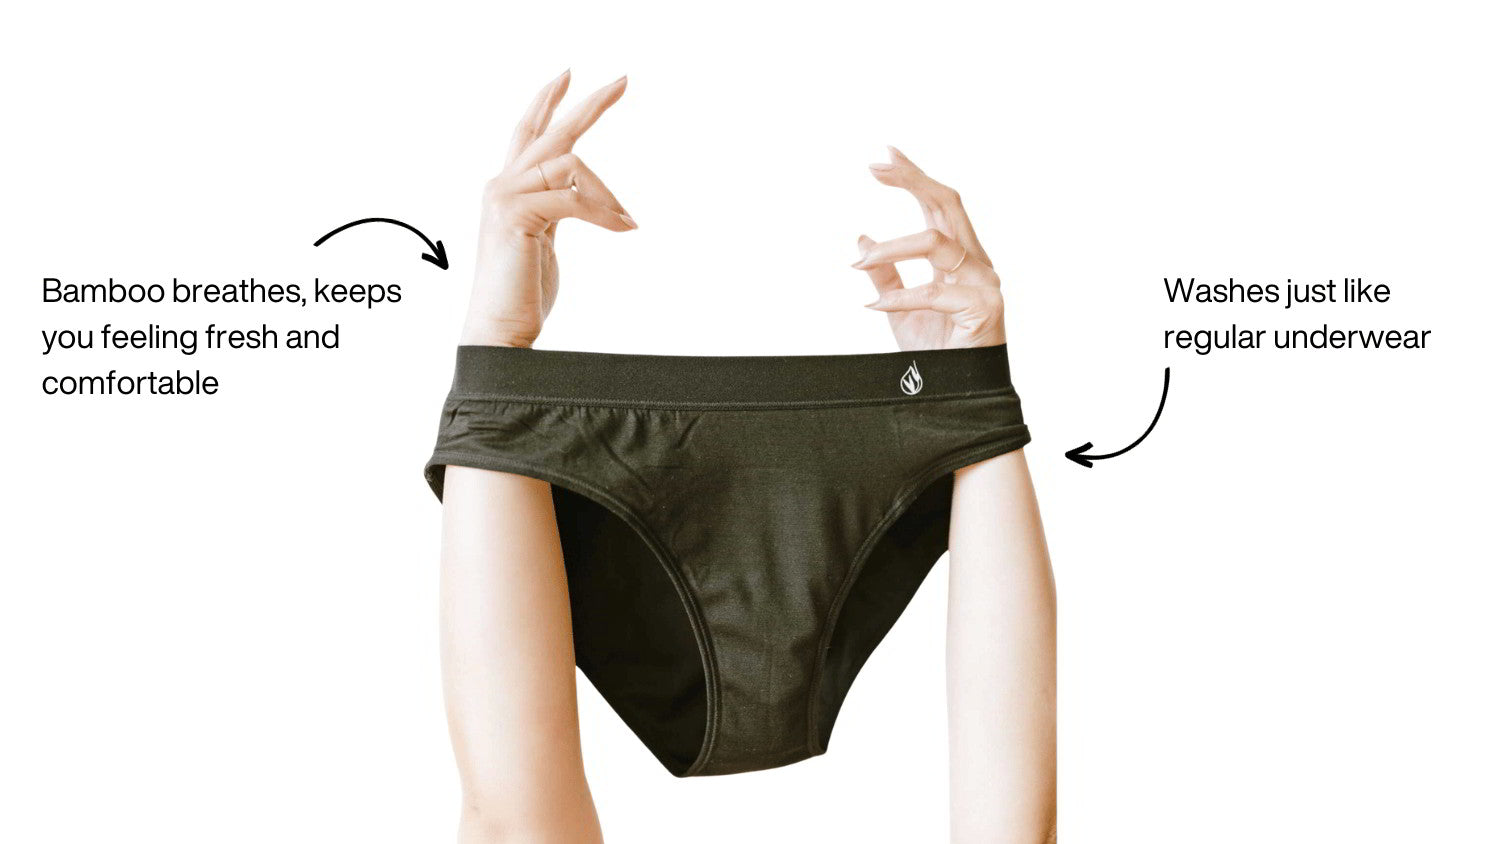 Underwear Expert - Thinking about how comfortable our underwear is